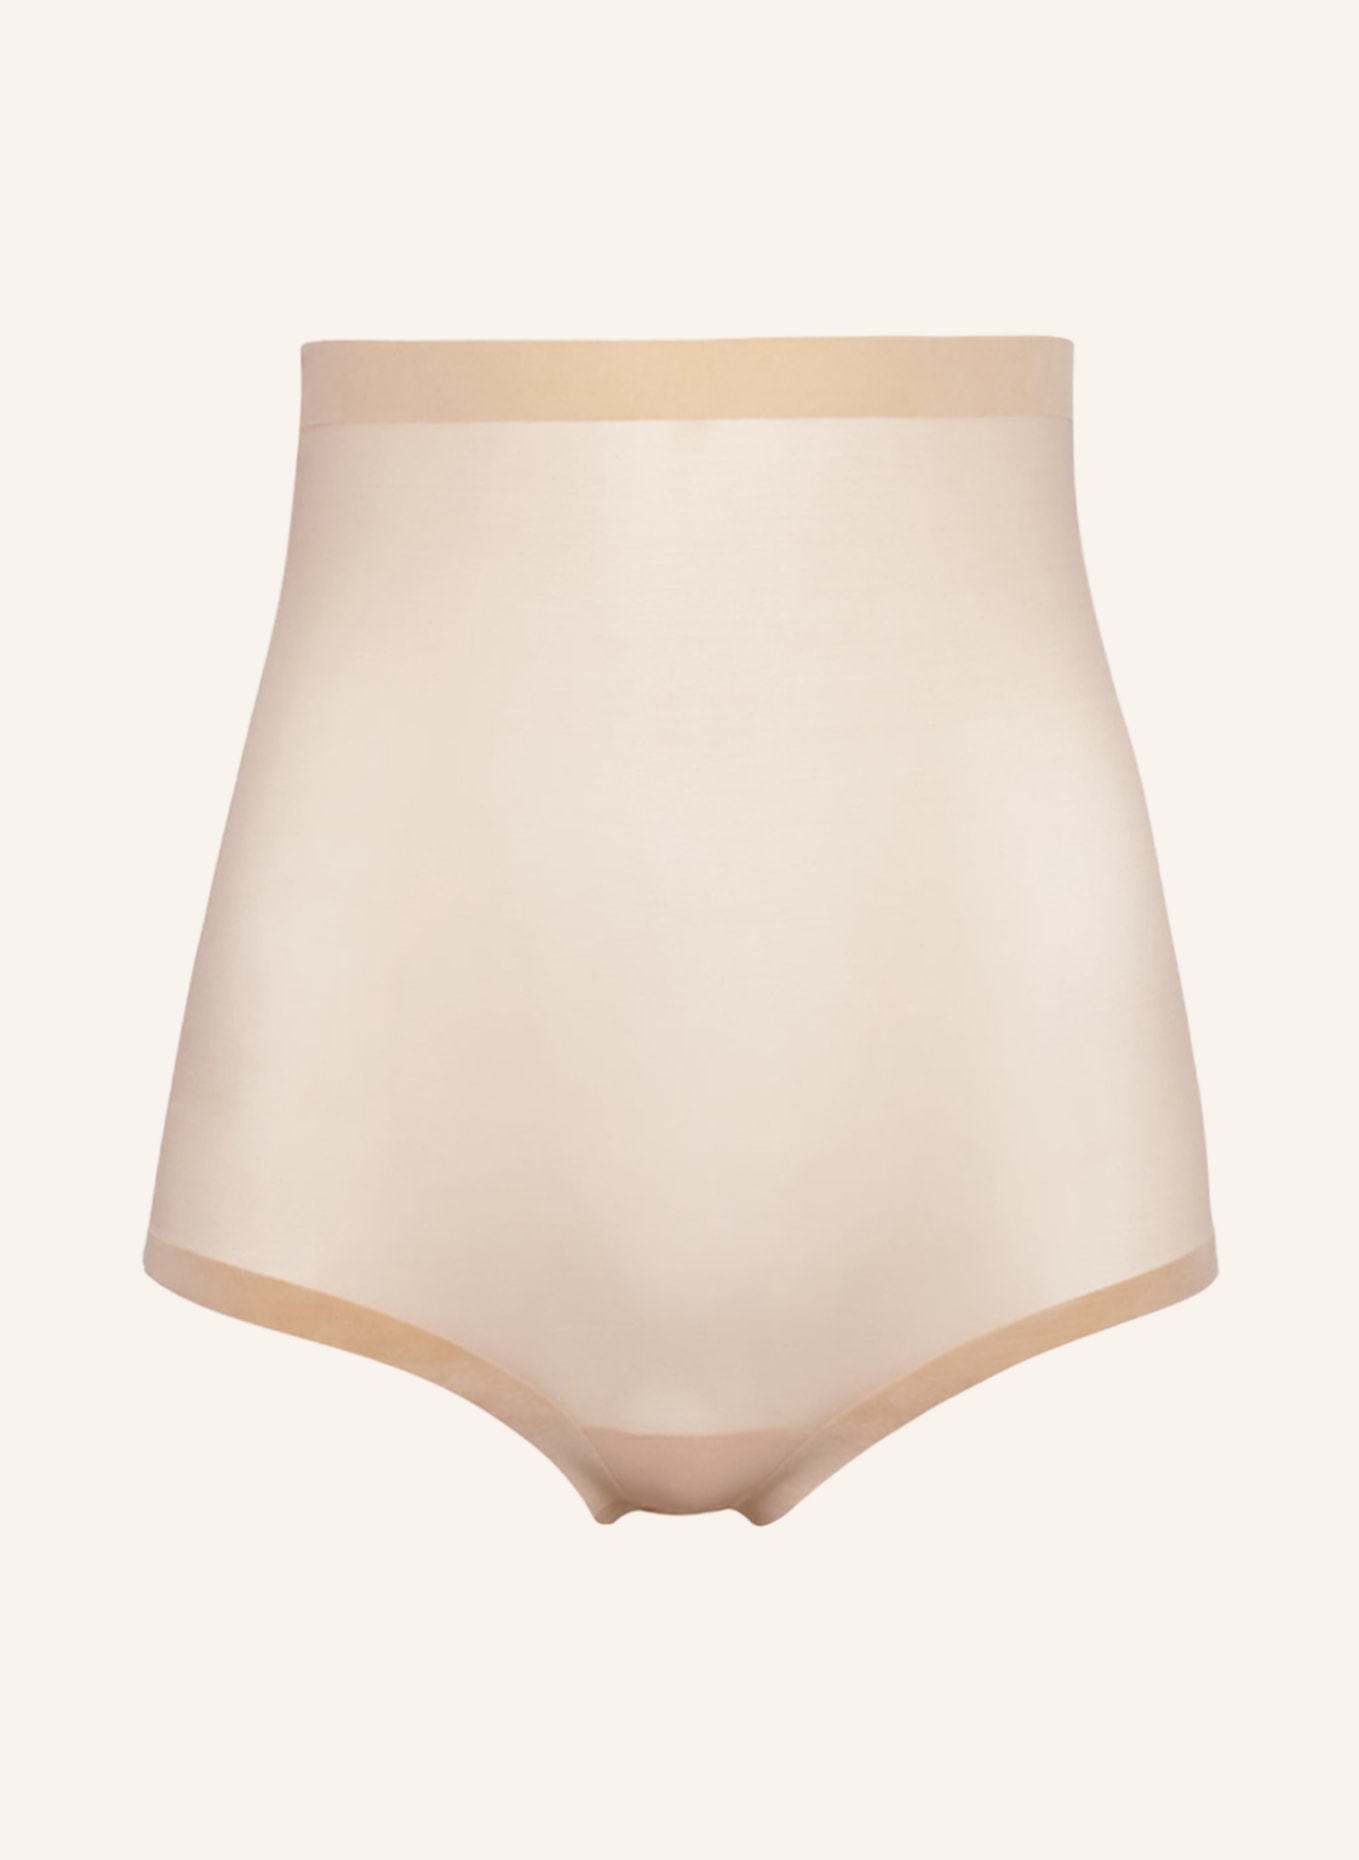 Tulle Control Panty High Waist